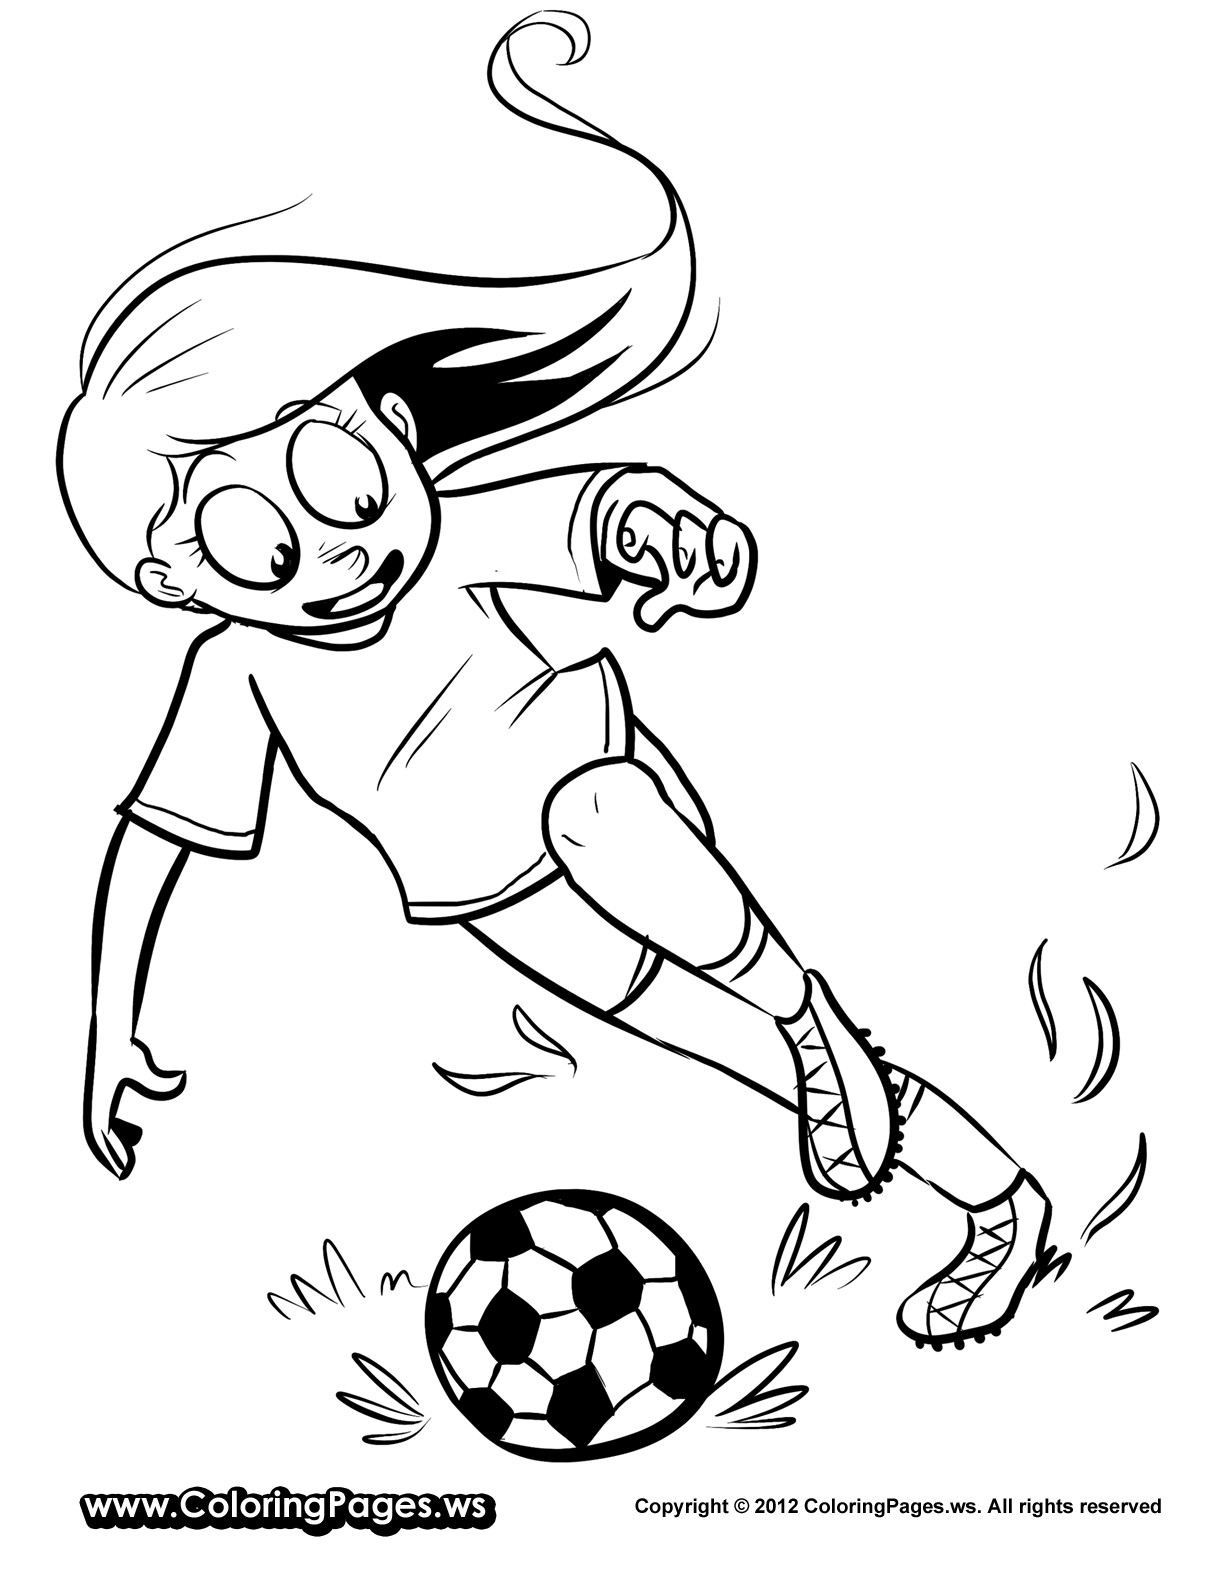 Soccer Girls Coloring Pages
 Soccer Player Coloring Pages Soccer Player